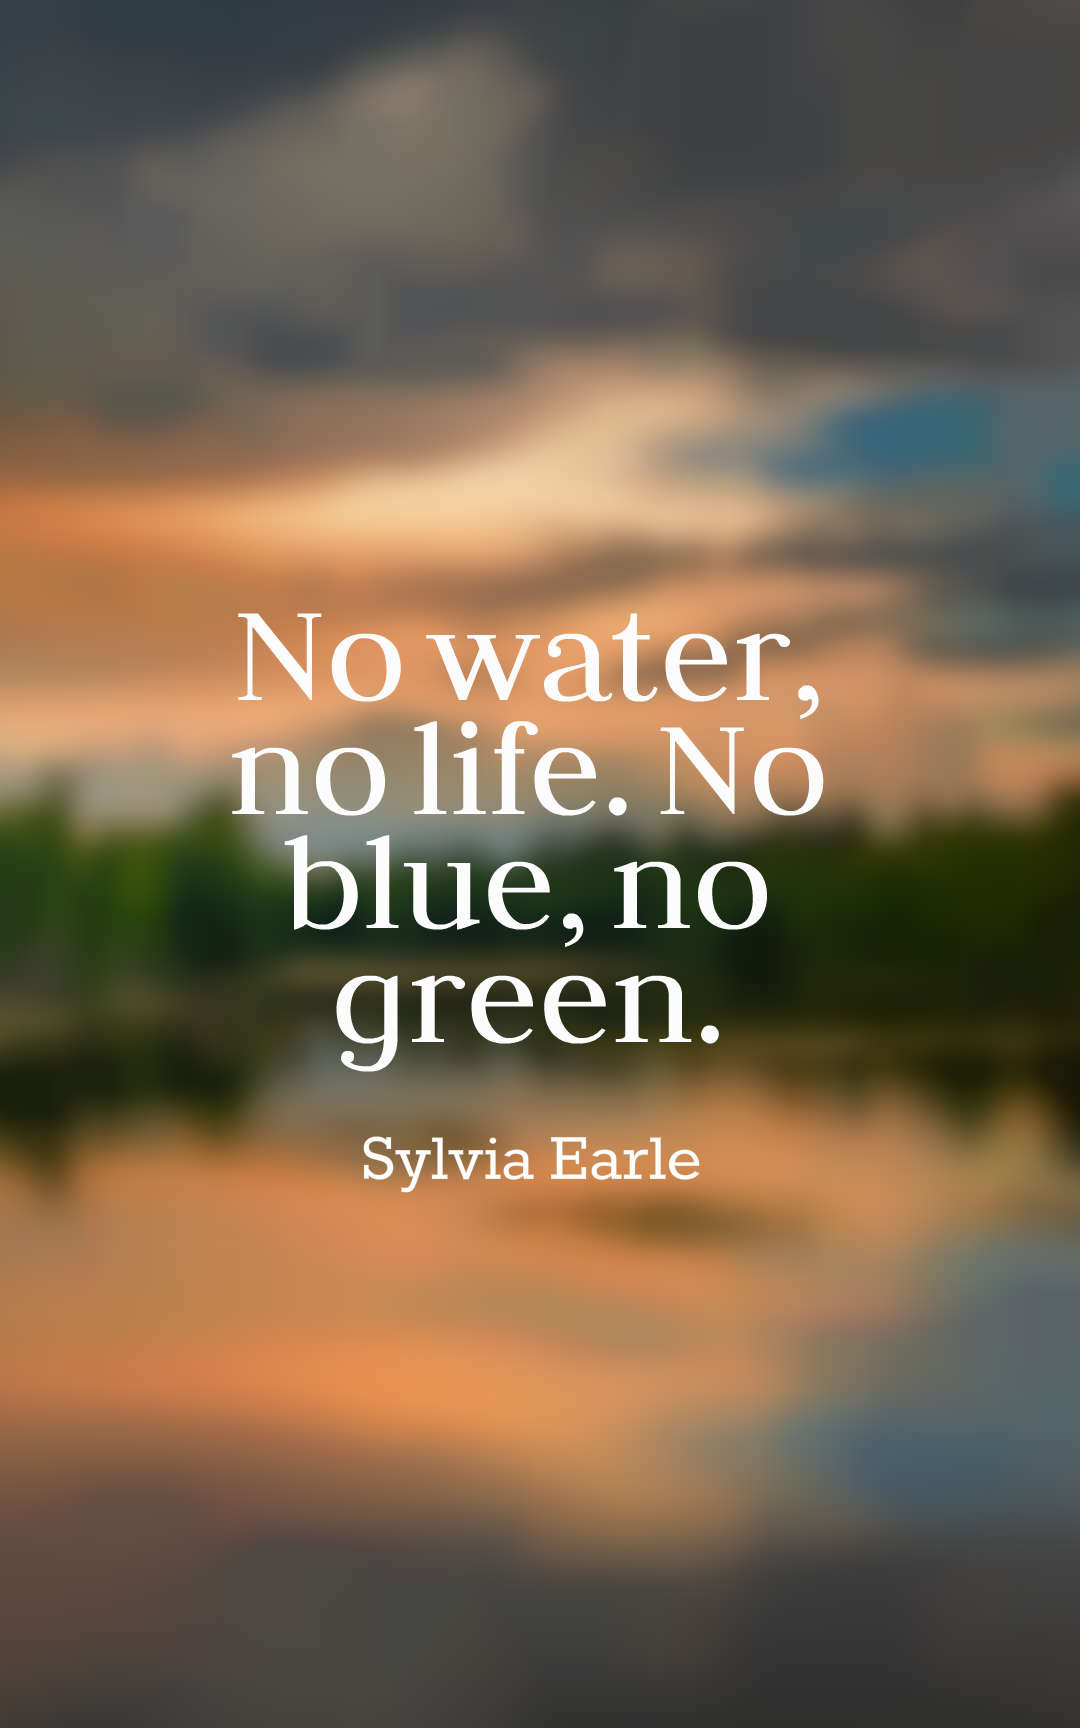 Water Inspirational Quotes
 30 Inspirational Water Quotes And Sayings